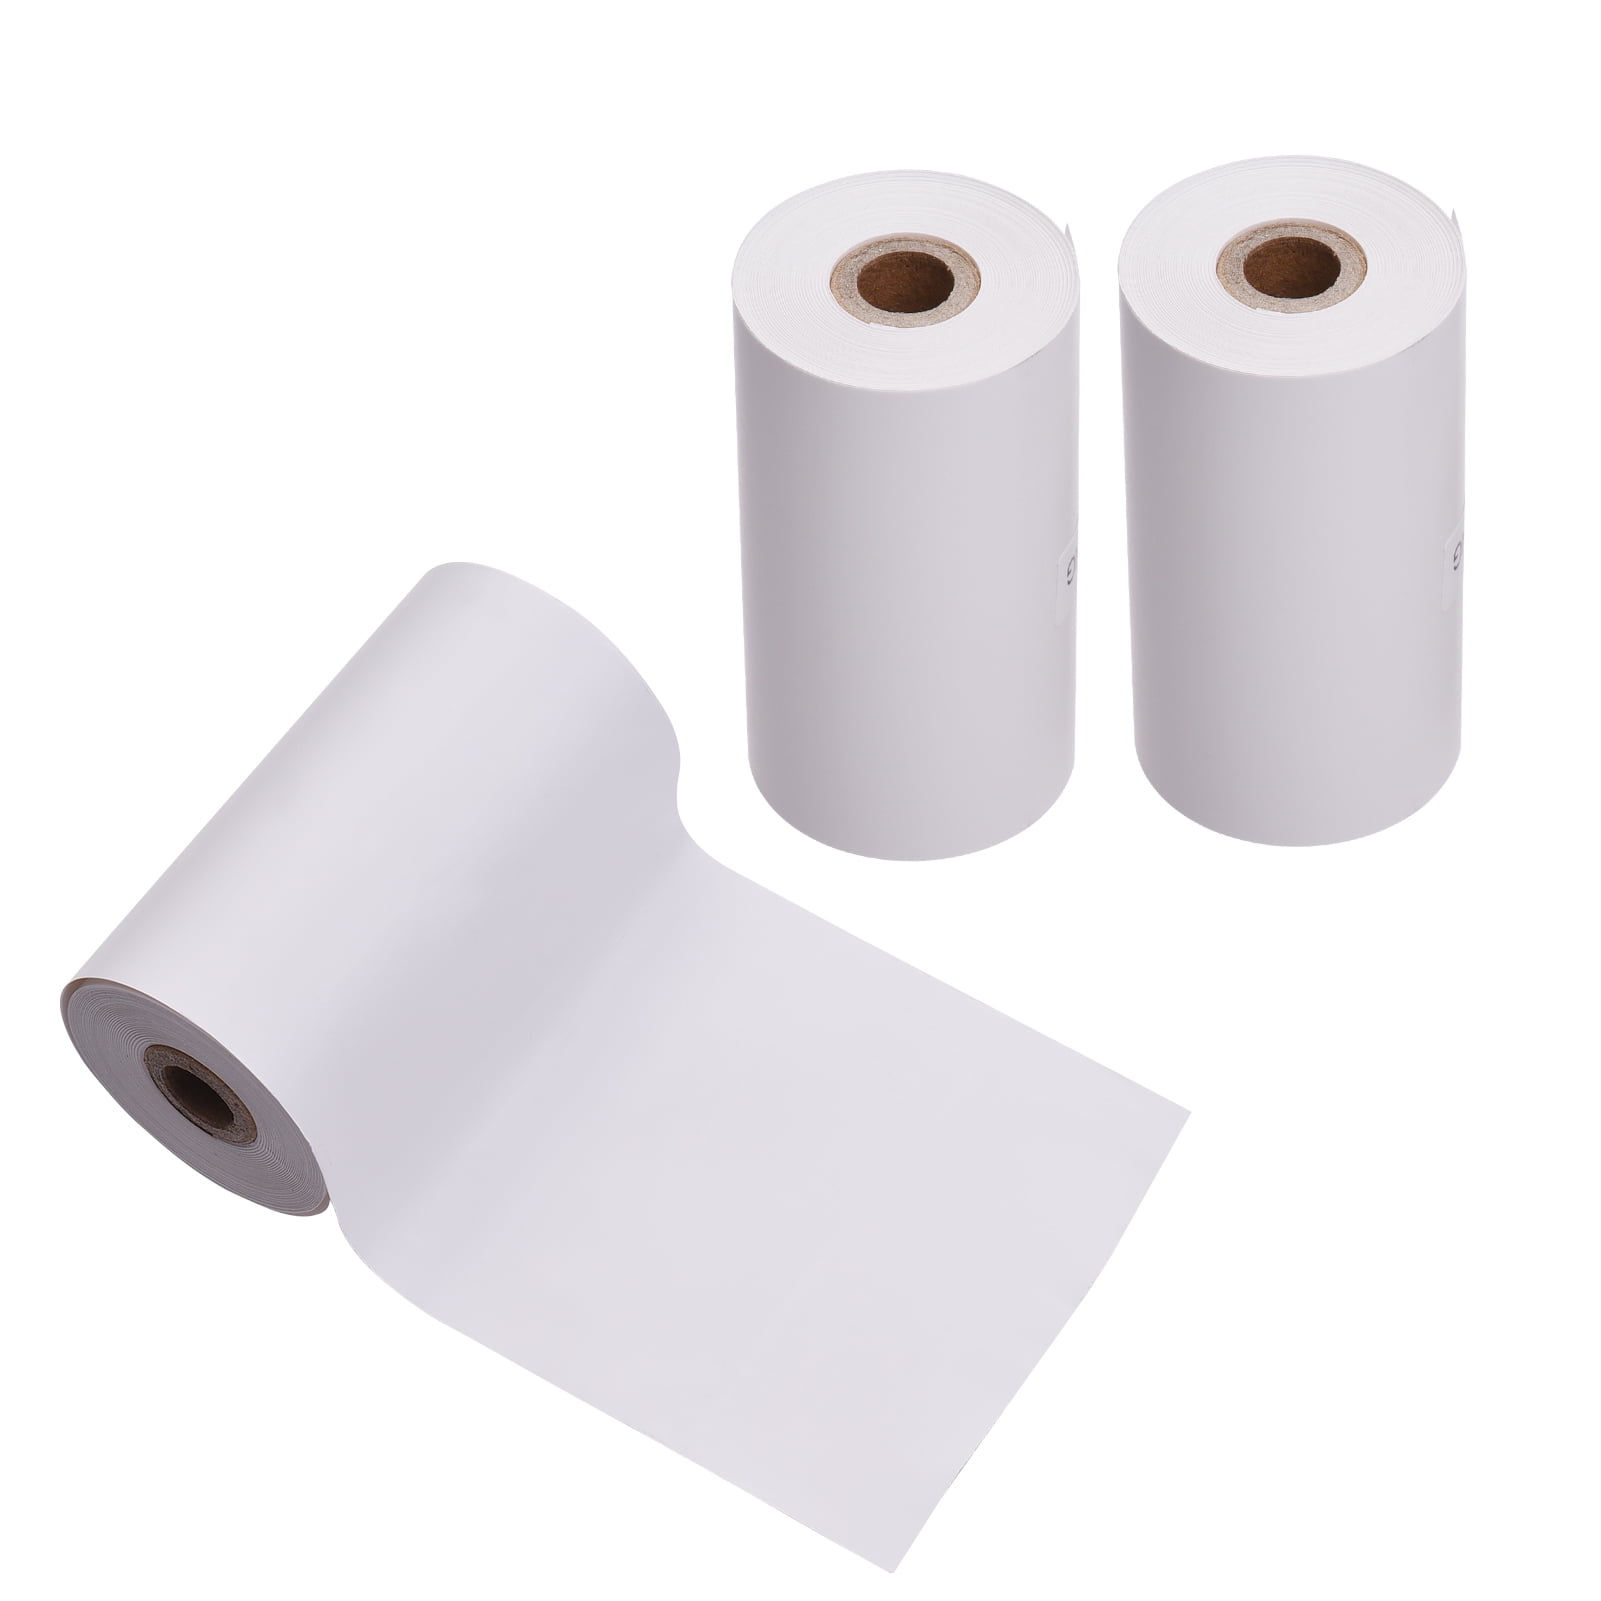 6 Rolls 57x30mm Camera Paper Refill Thermal Paper White